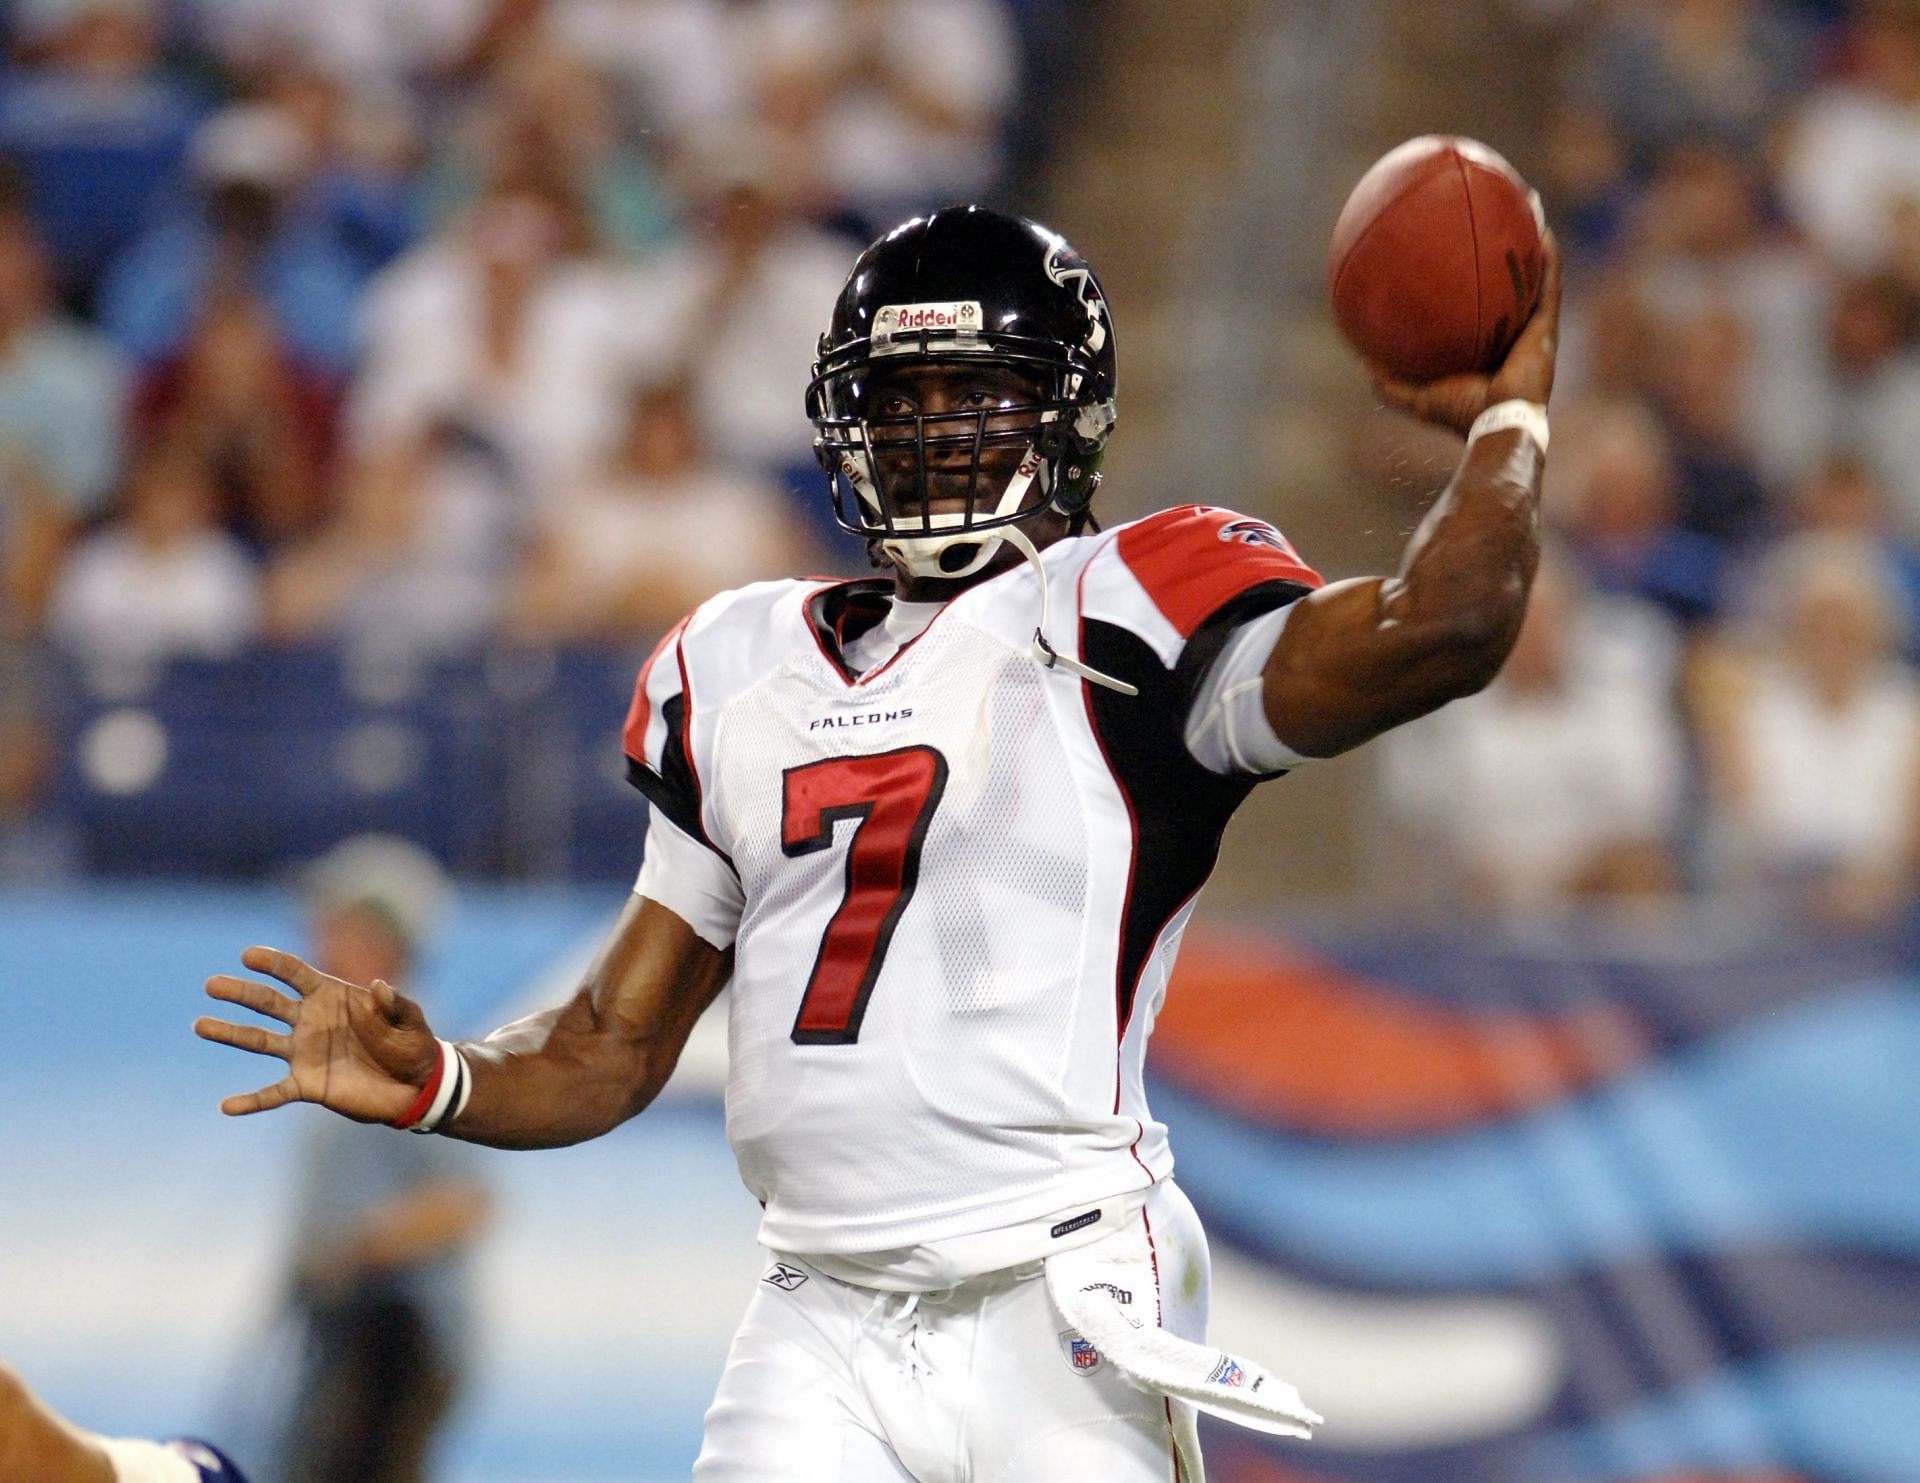 Michael Vick was exciting during his six-year stint with the Atlanta Falcons.